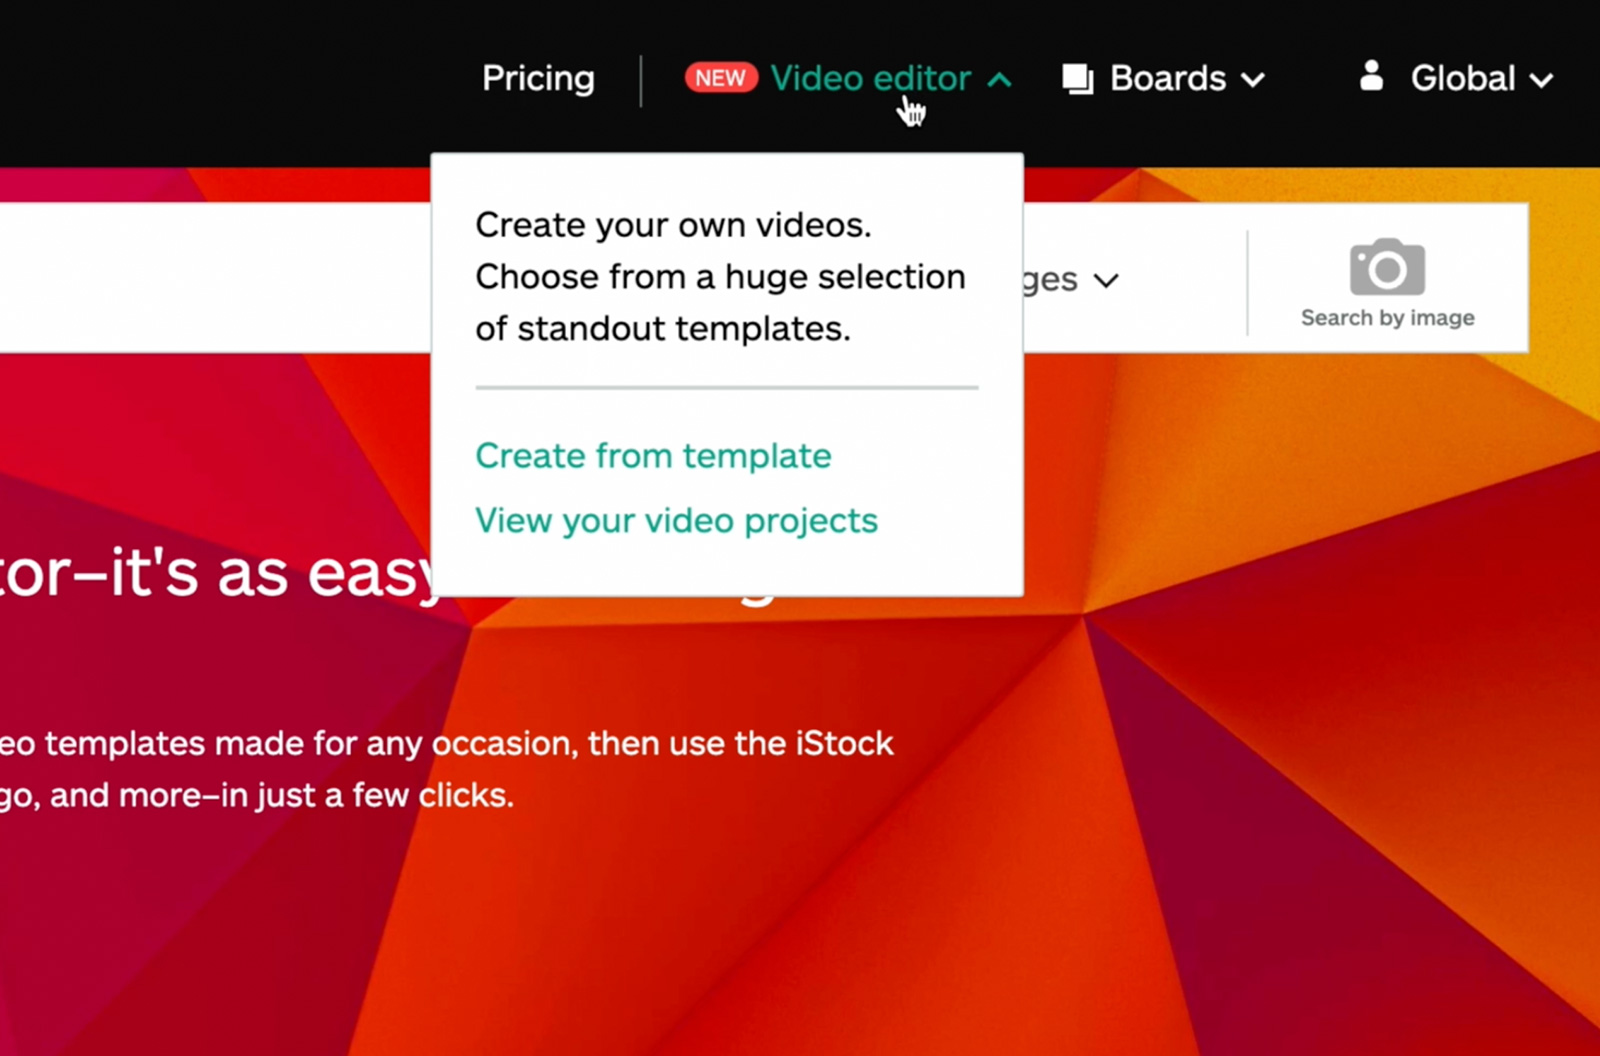 iStock's homepage is shown with the cursor hovering over the [New] Video editor button.